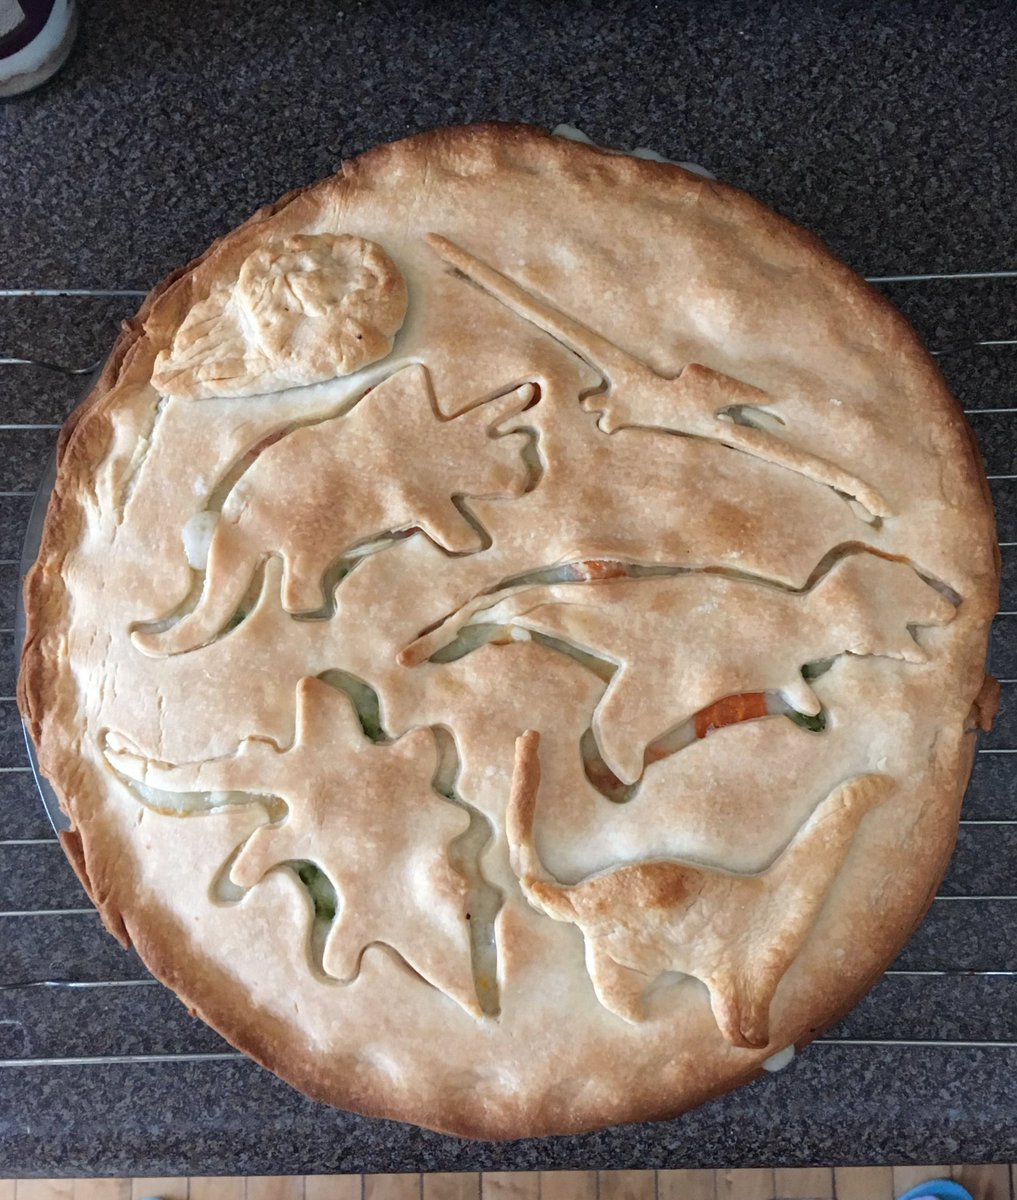 I made a chicken pot pie. Covered in dinosaurs. Technically correct! The best kind of correct. #chickenpotpie #dinosaurpie